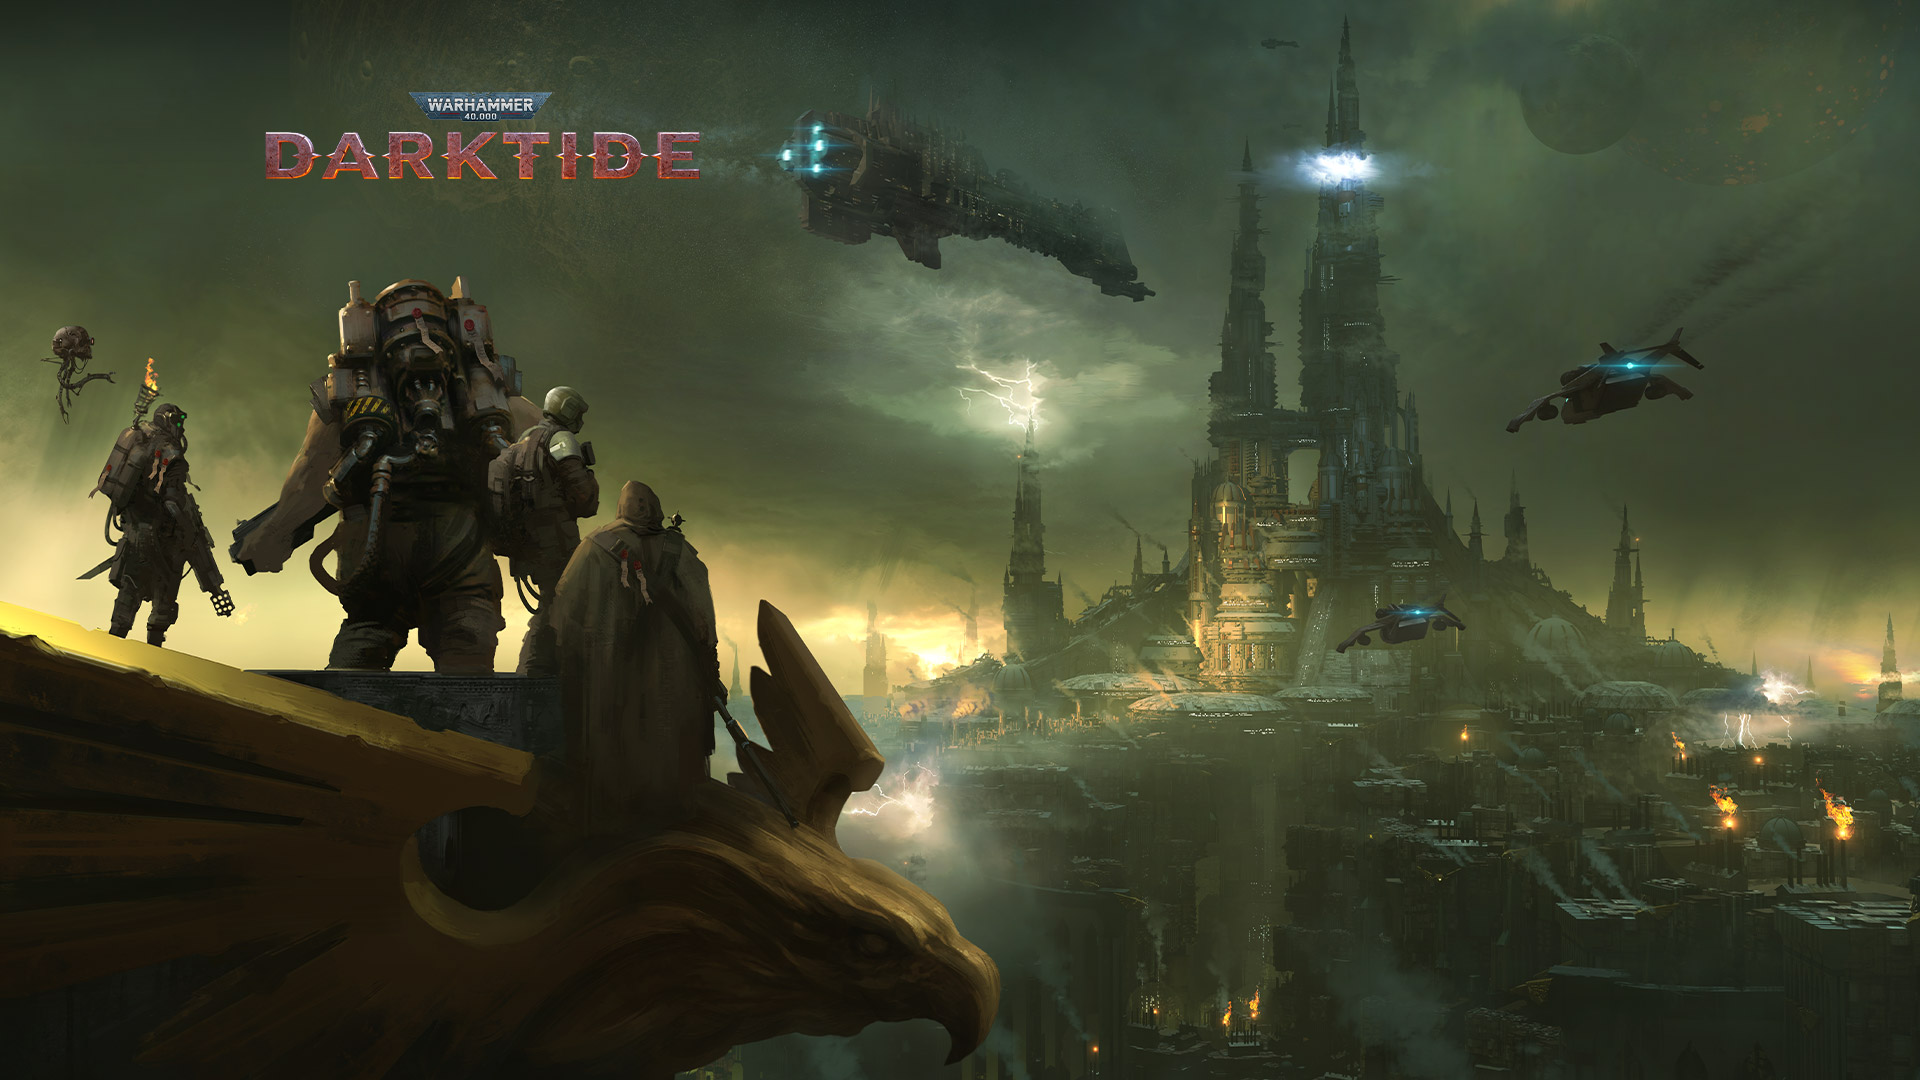 Warhammer 40,000 Darktide, a group of characters overlook a city shrouded in fog.